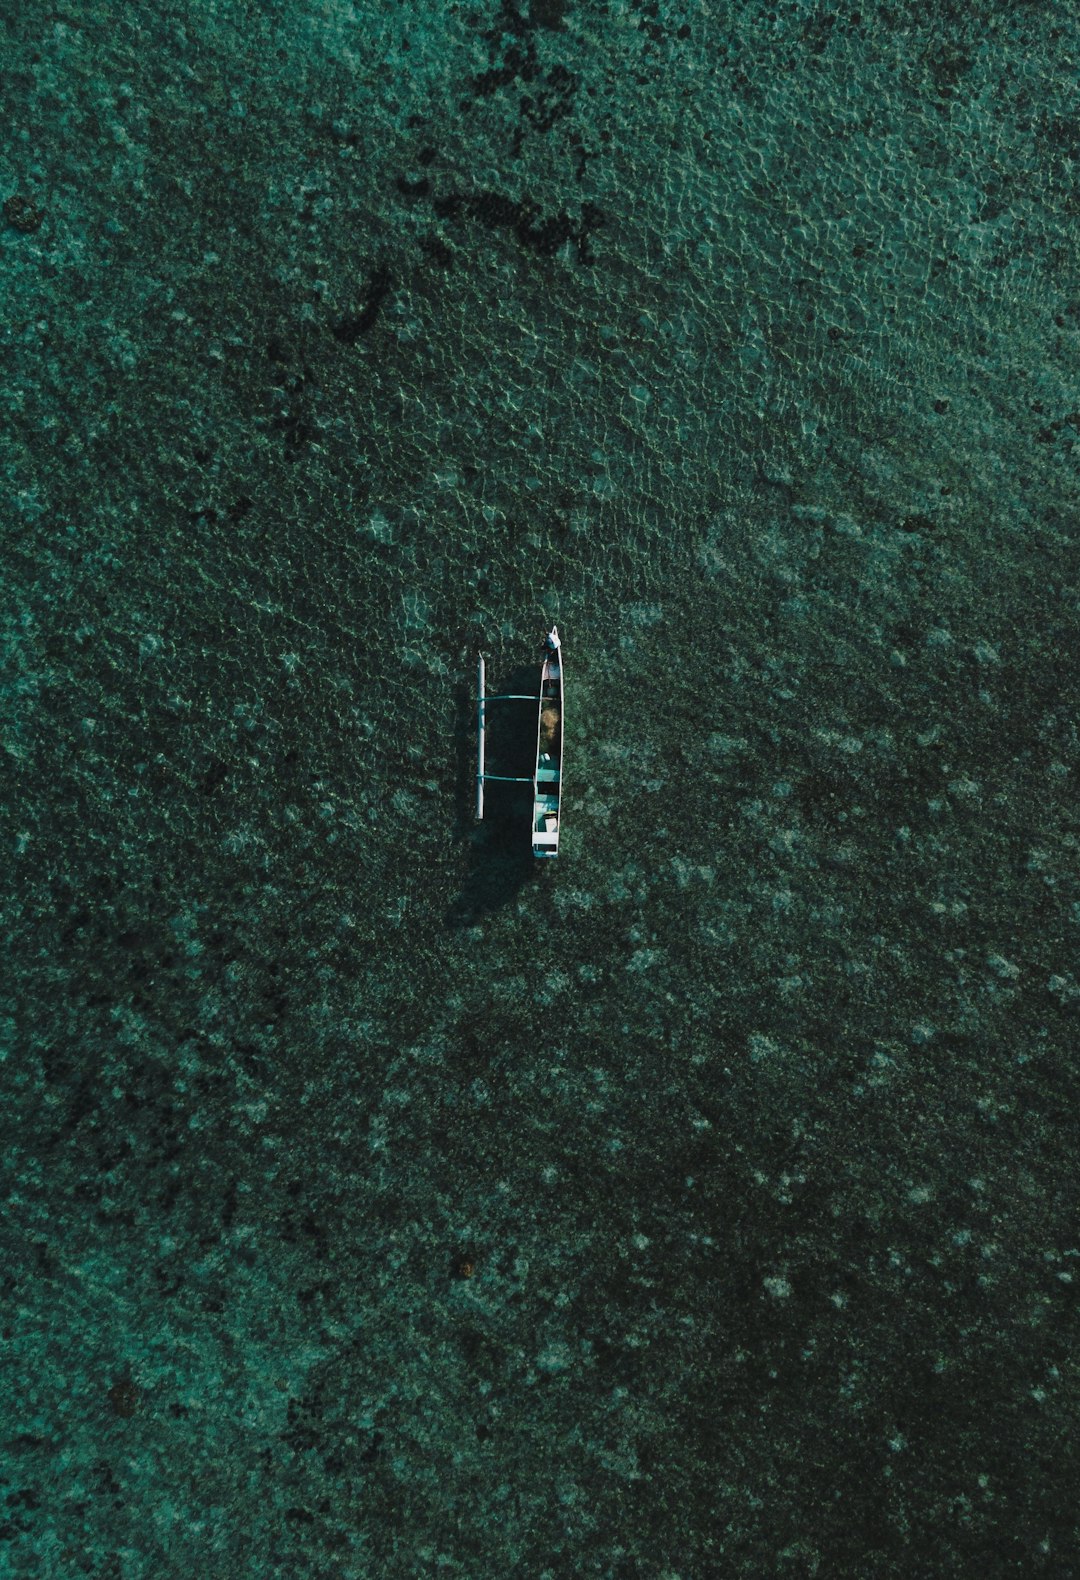 boat on green ground